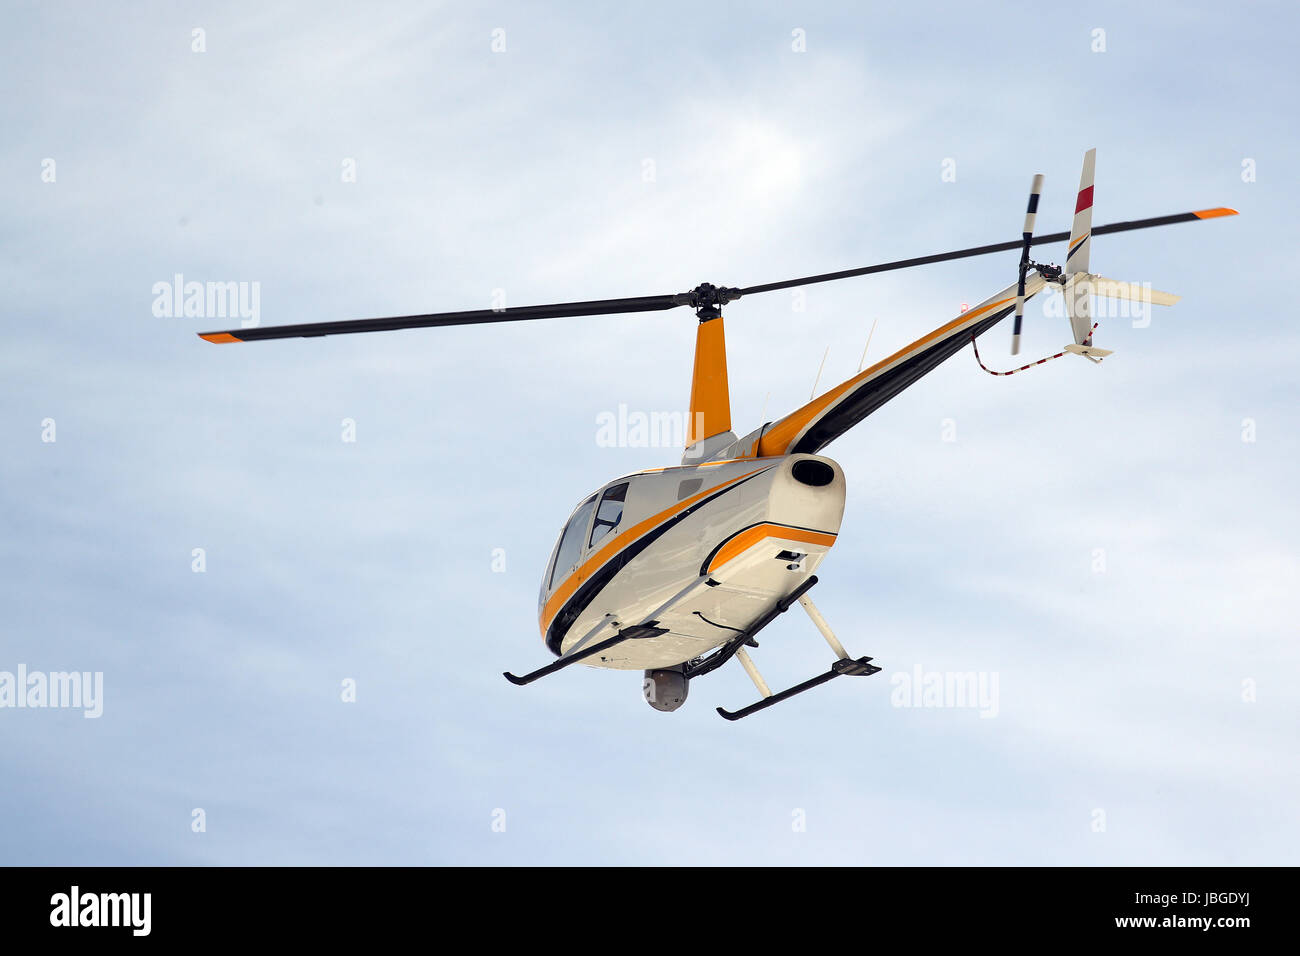 Small turbine helicopter in flight with camera and FLIR equipment Stock Photo